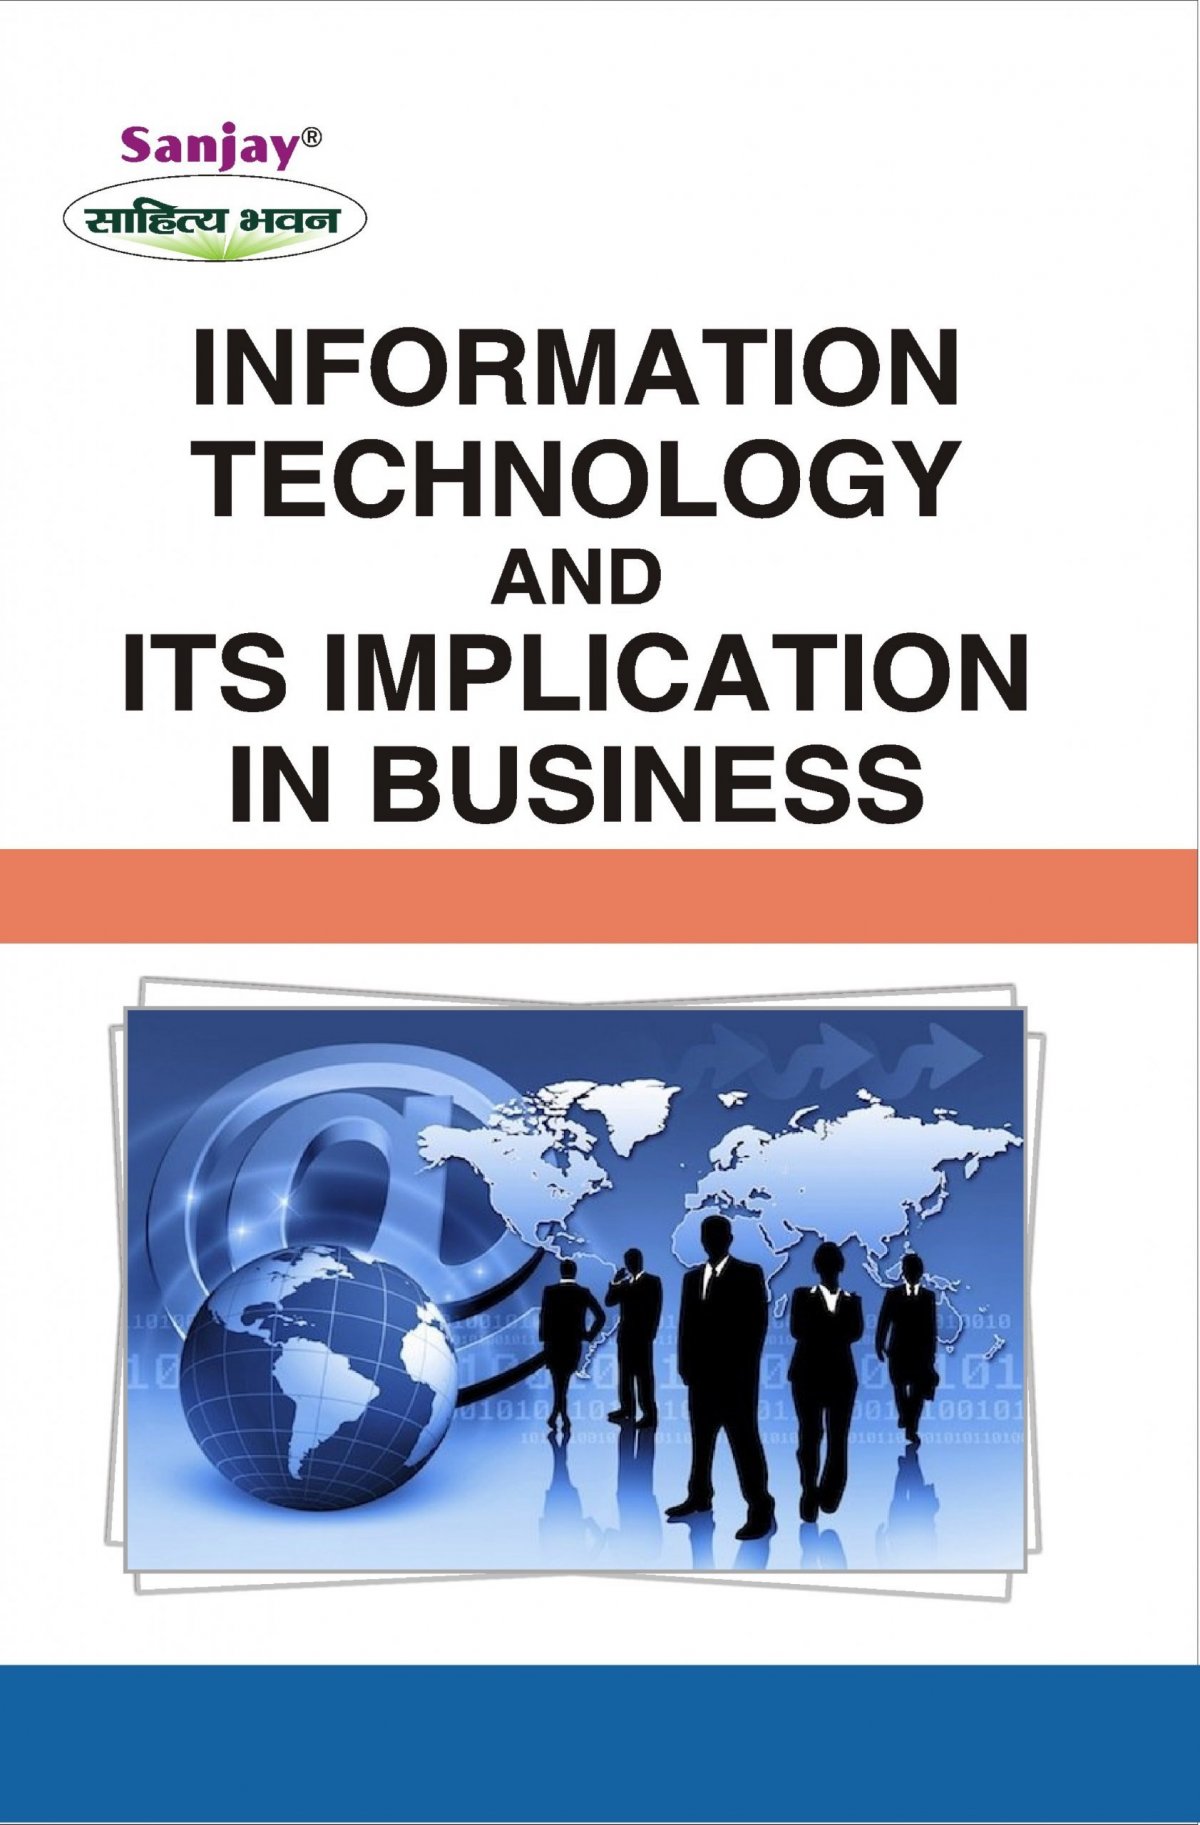 Information Technology and its Implications in Business